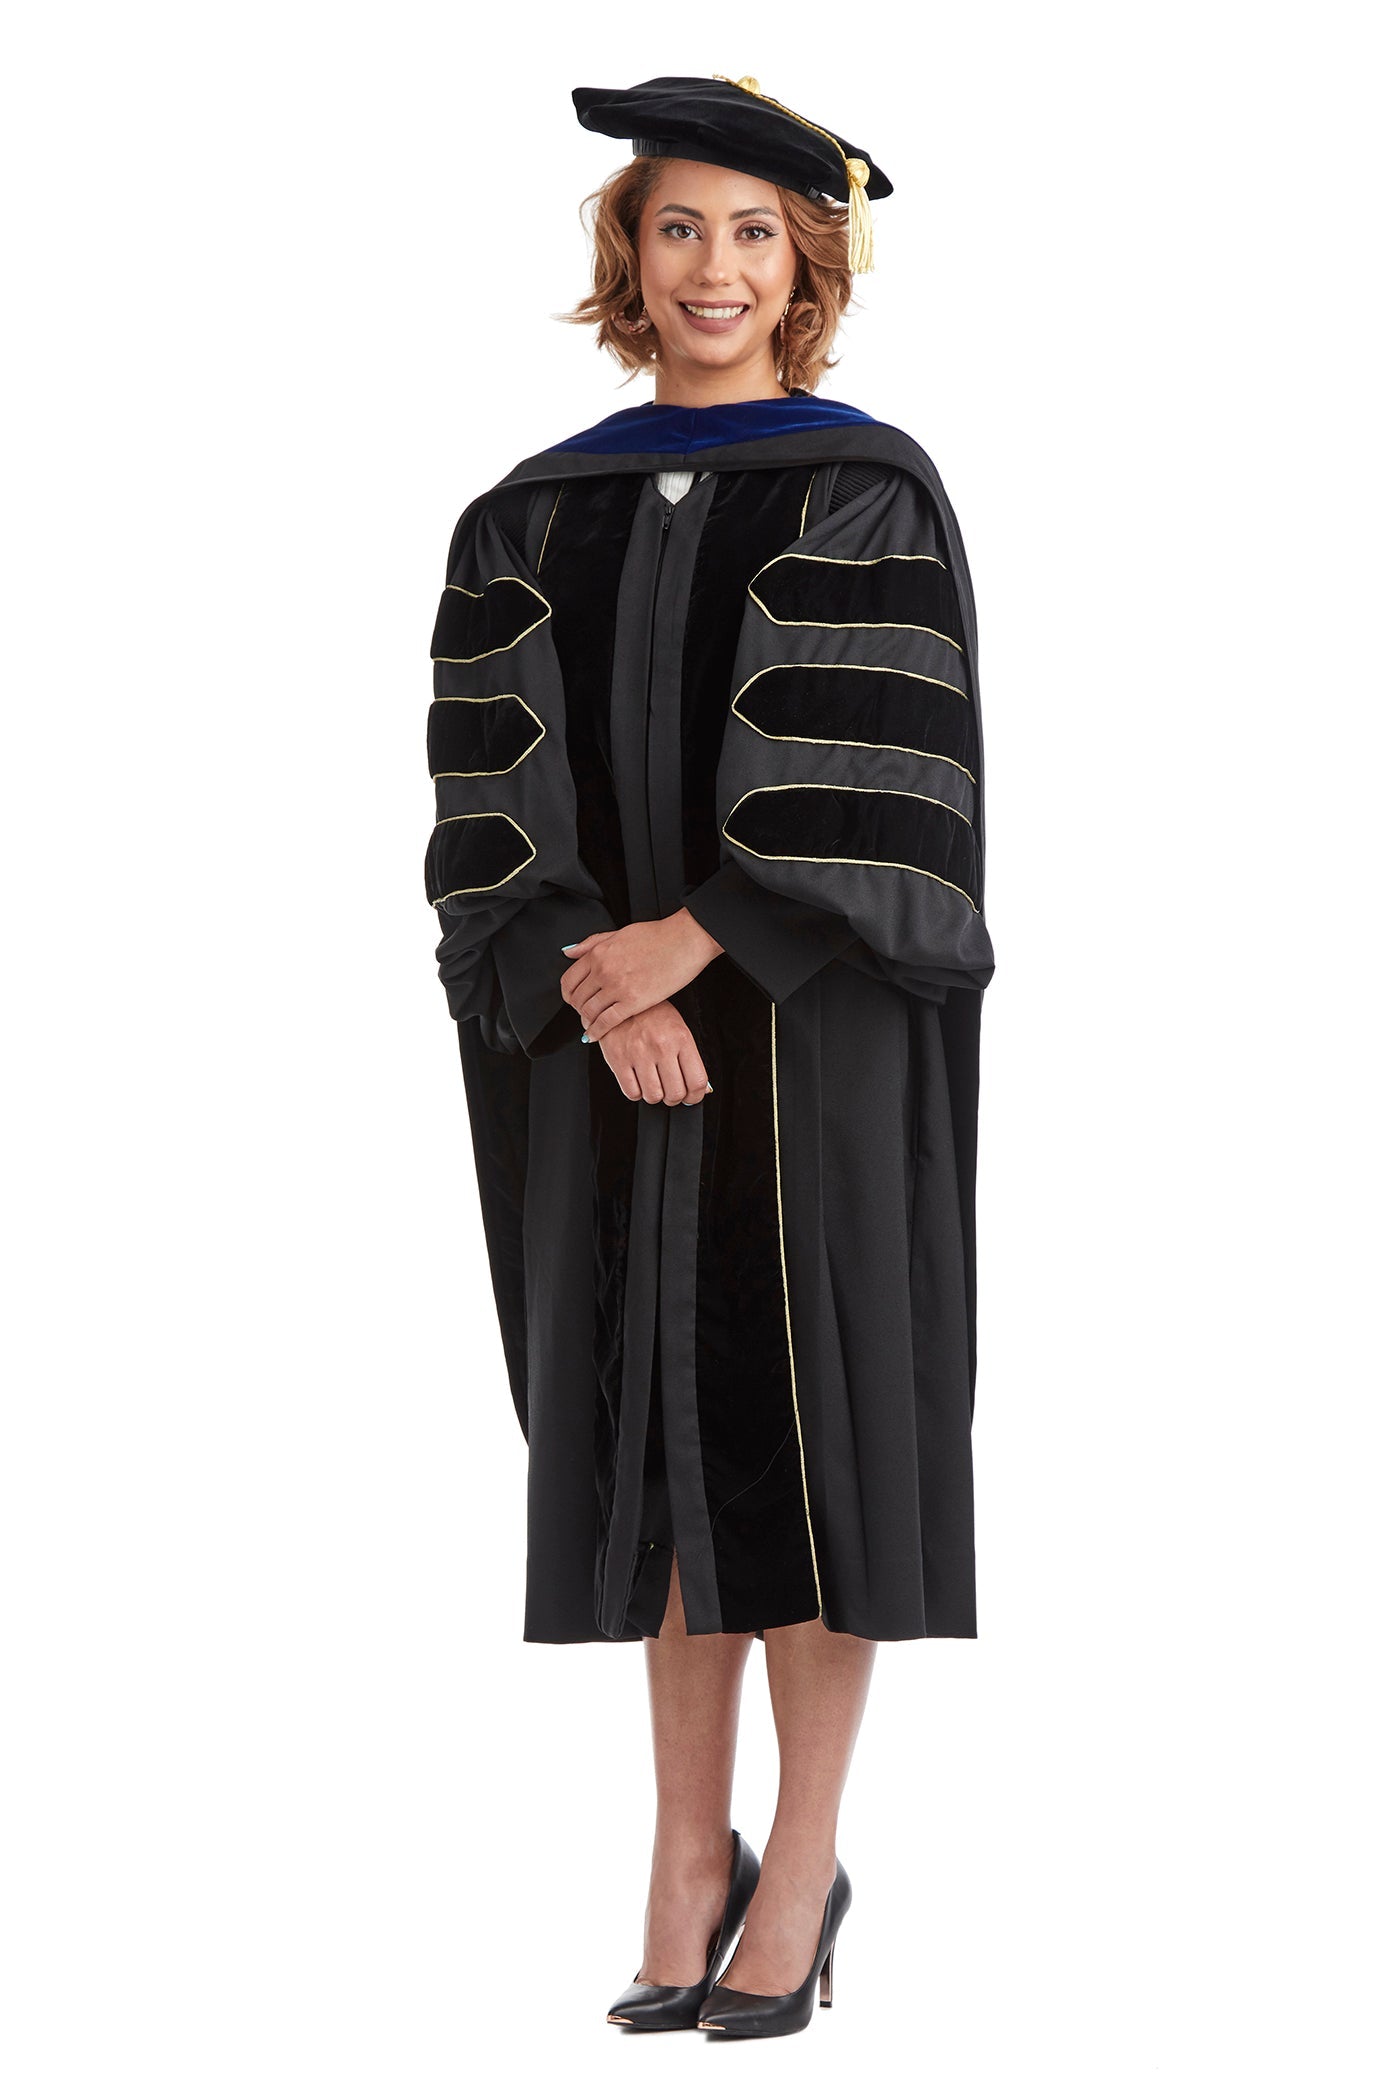 Deluxe Doctoral Academic Gown, Hood and Tam Package Faith University – Graduation  Cap and Gown